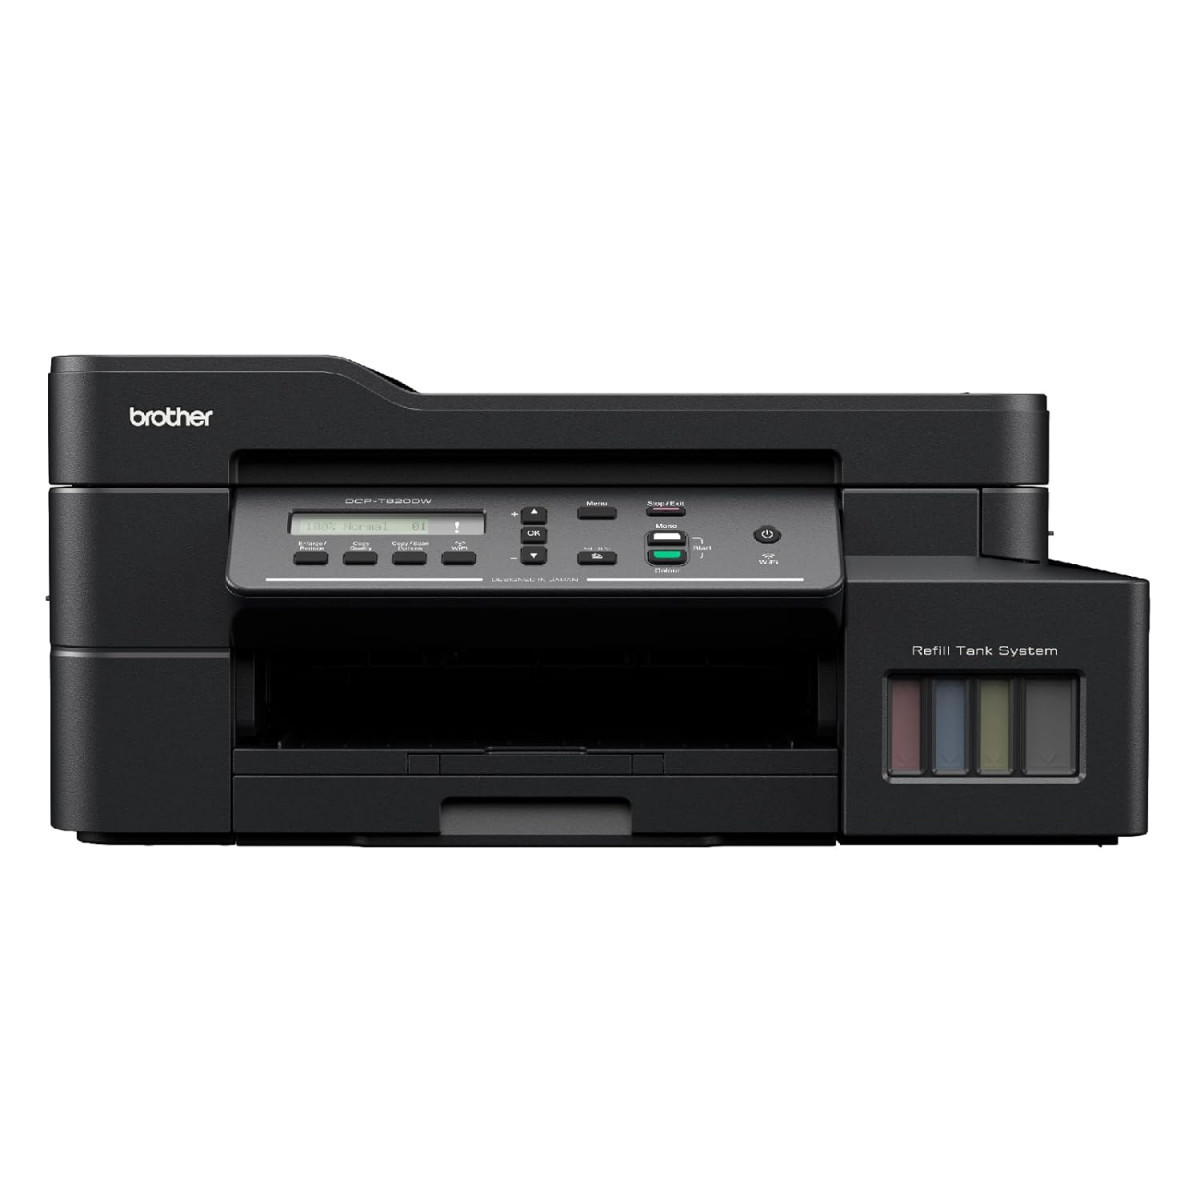 Brother DCP-T820DW - Wi-Fi & Auto Duplex Color Ink Tank Multifunction (Print, Scan & Copy)